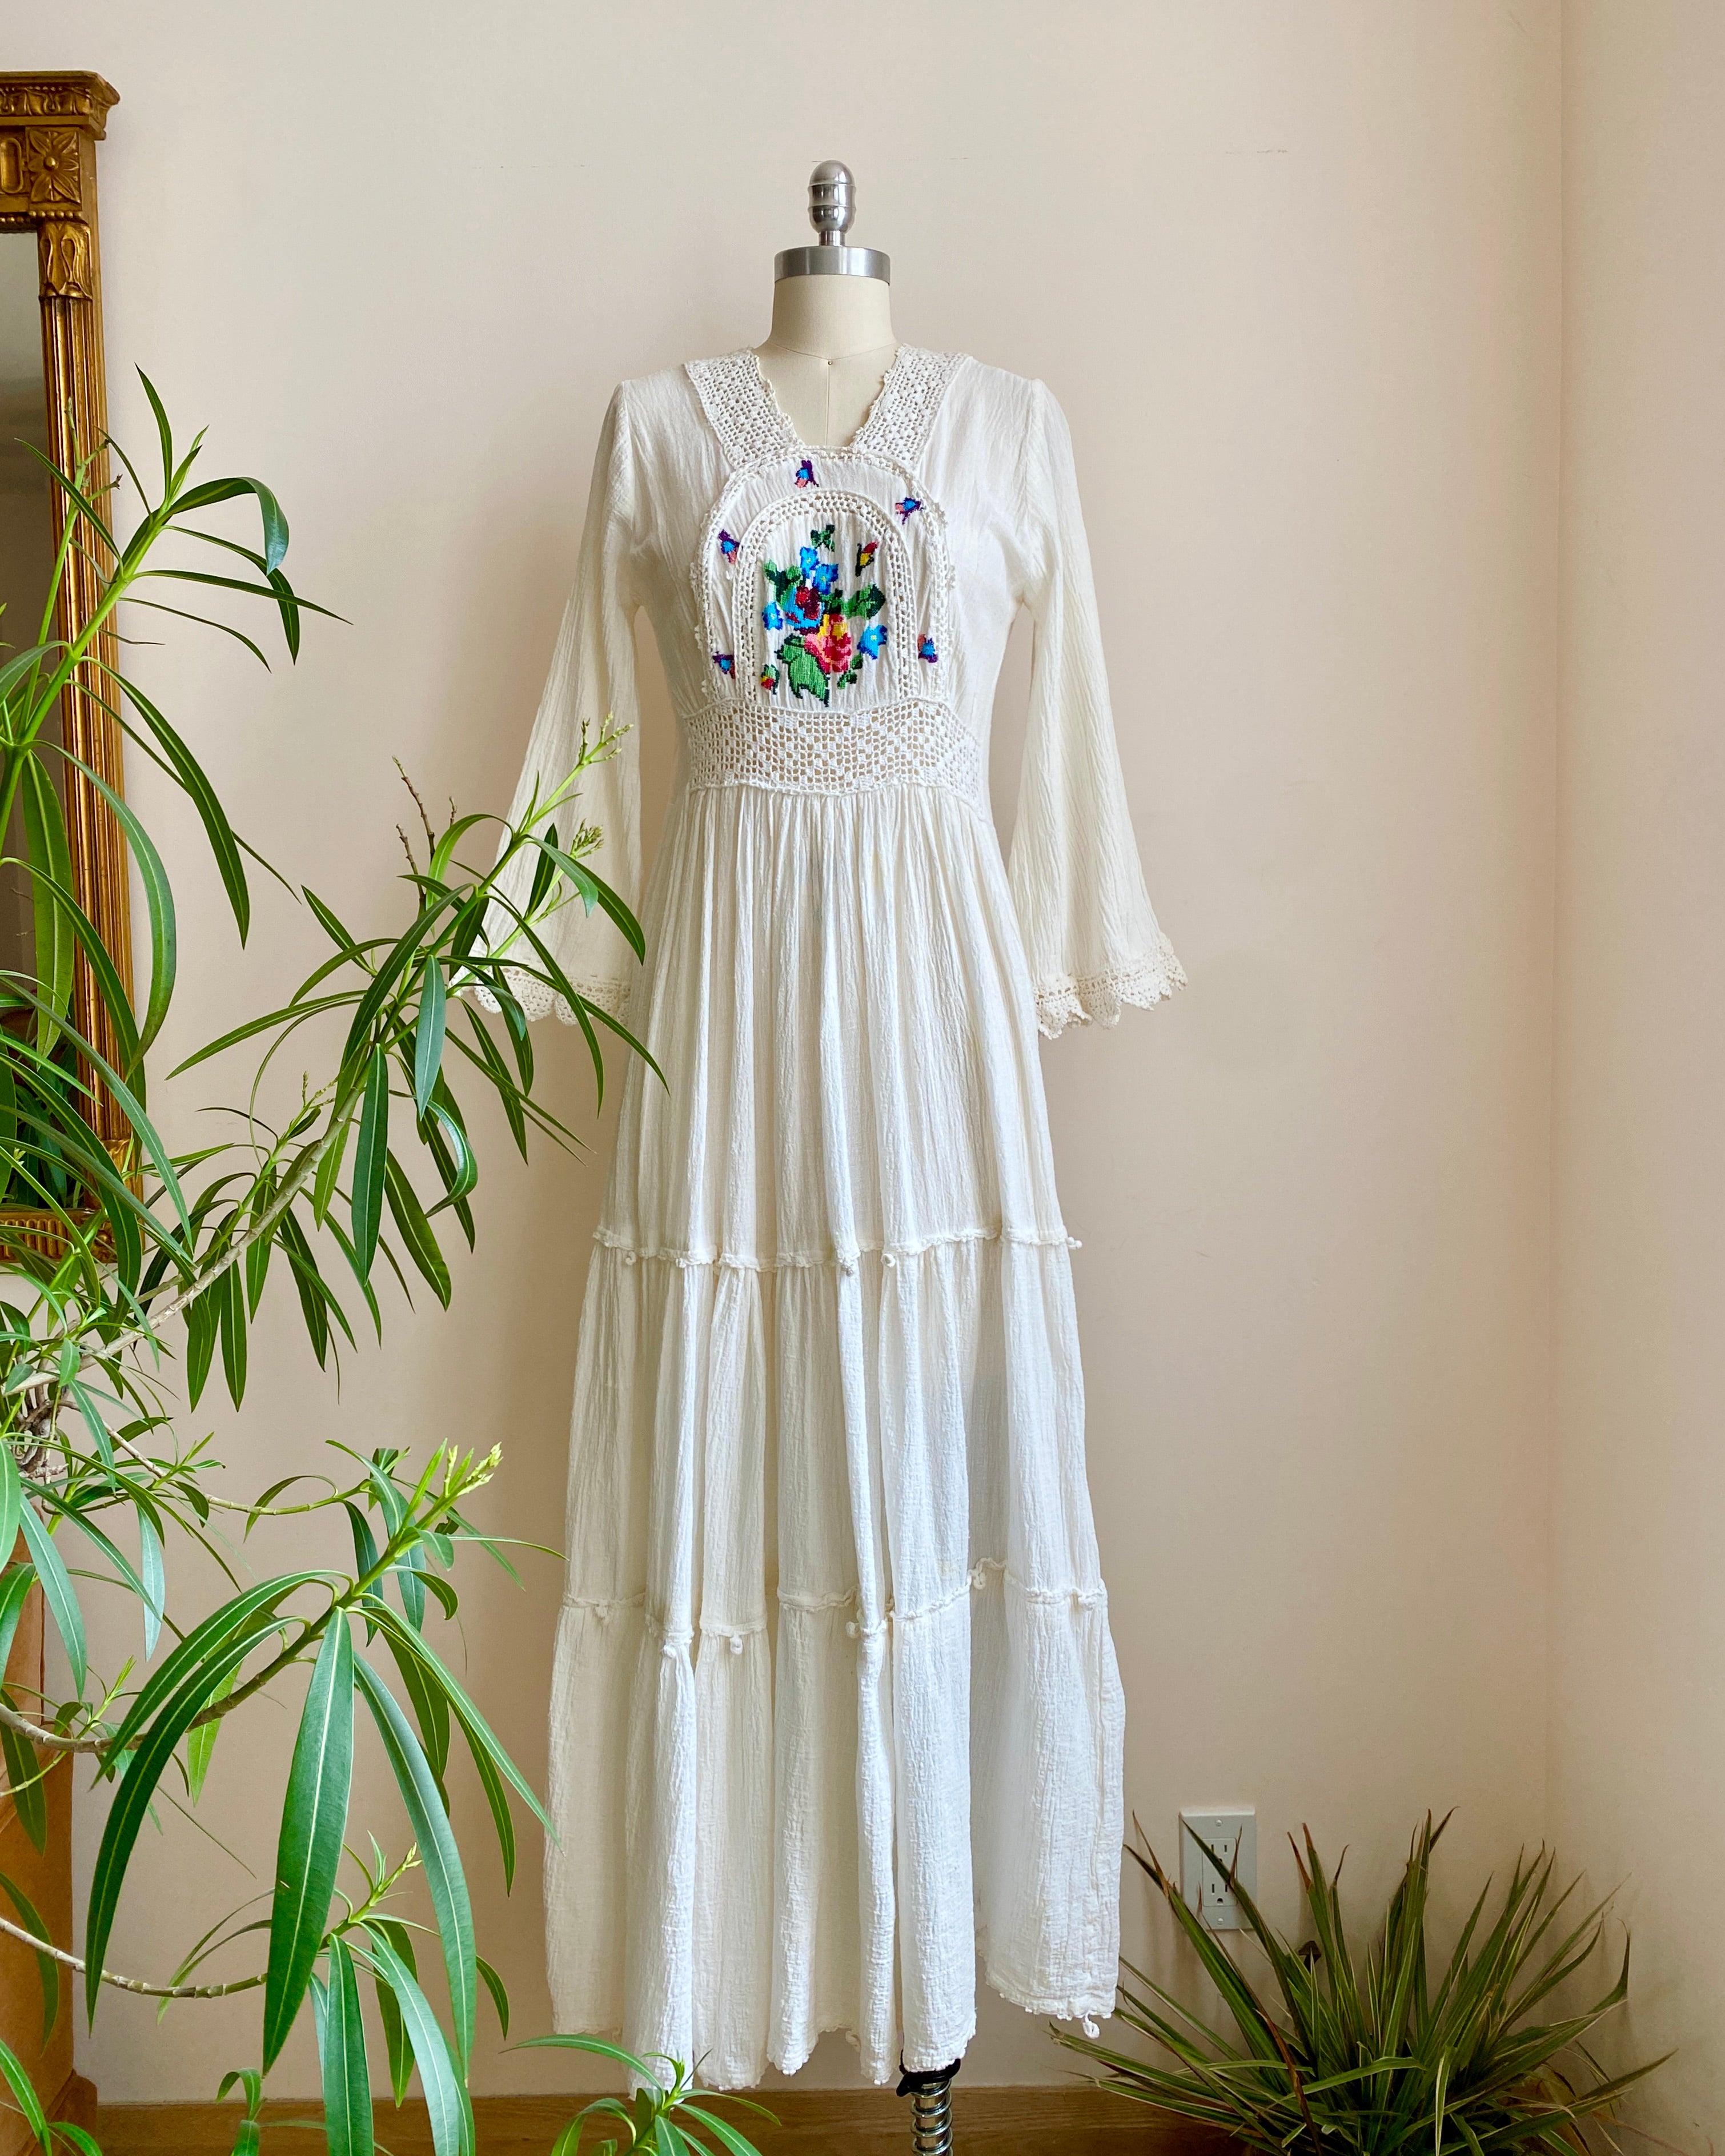 VINTAGE 1970s Cream Cotton Gauze Tiered Bell Sleeve Prairie Maxi Dress with Embroidery and Crochet Details size S 4